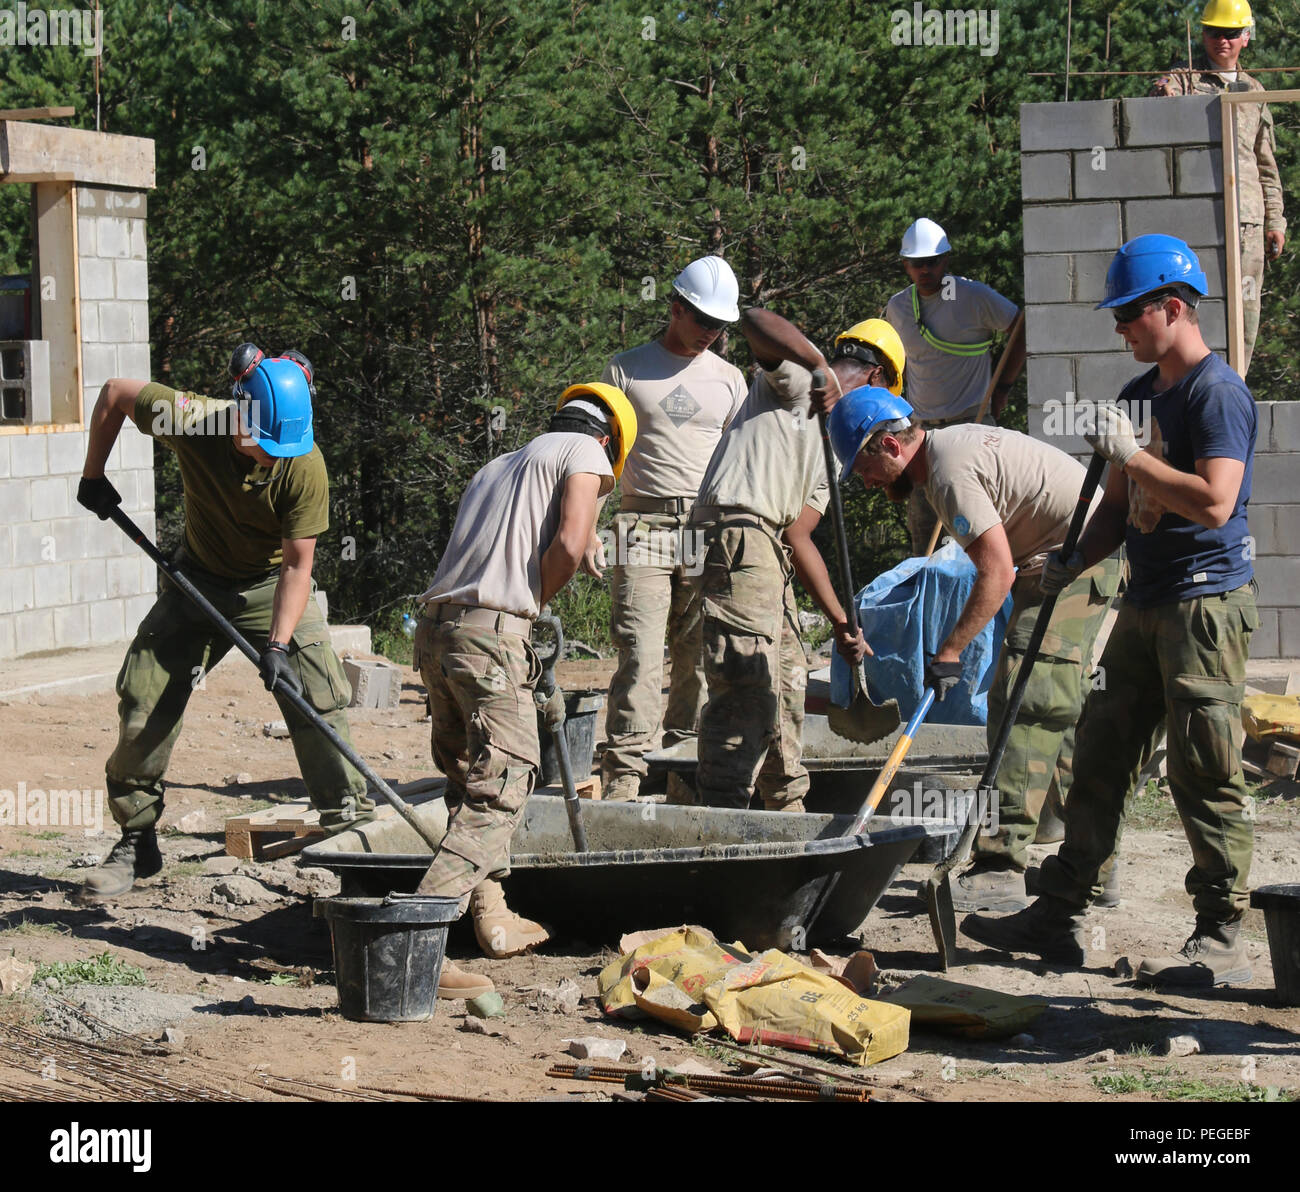 Soldiers assigned to 500th Engineer Company, 15th Engineer Battalion, 18th Military Police, work with their allies from the Norwegian Army High Readiness Force to mix concrete for a wall construction project in the Central Training Area, Estonia, Aug. 18, as part of Operation Atlantic Resolve. The U.S.-European strategic partnership is built on a foundation of shared values, experiences and commitment to a safe and stable Europe. (U.S. Army photo by Spc. Jacqueline Dowland, 13th Public Affairs Detachment) Stock Photo